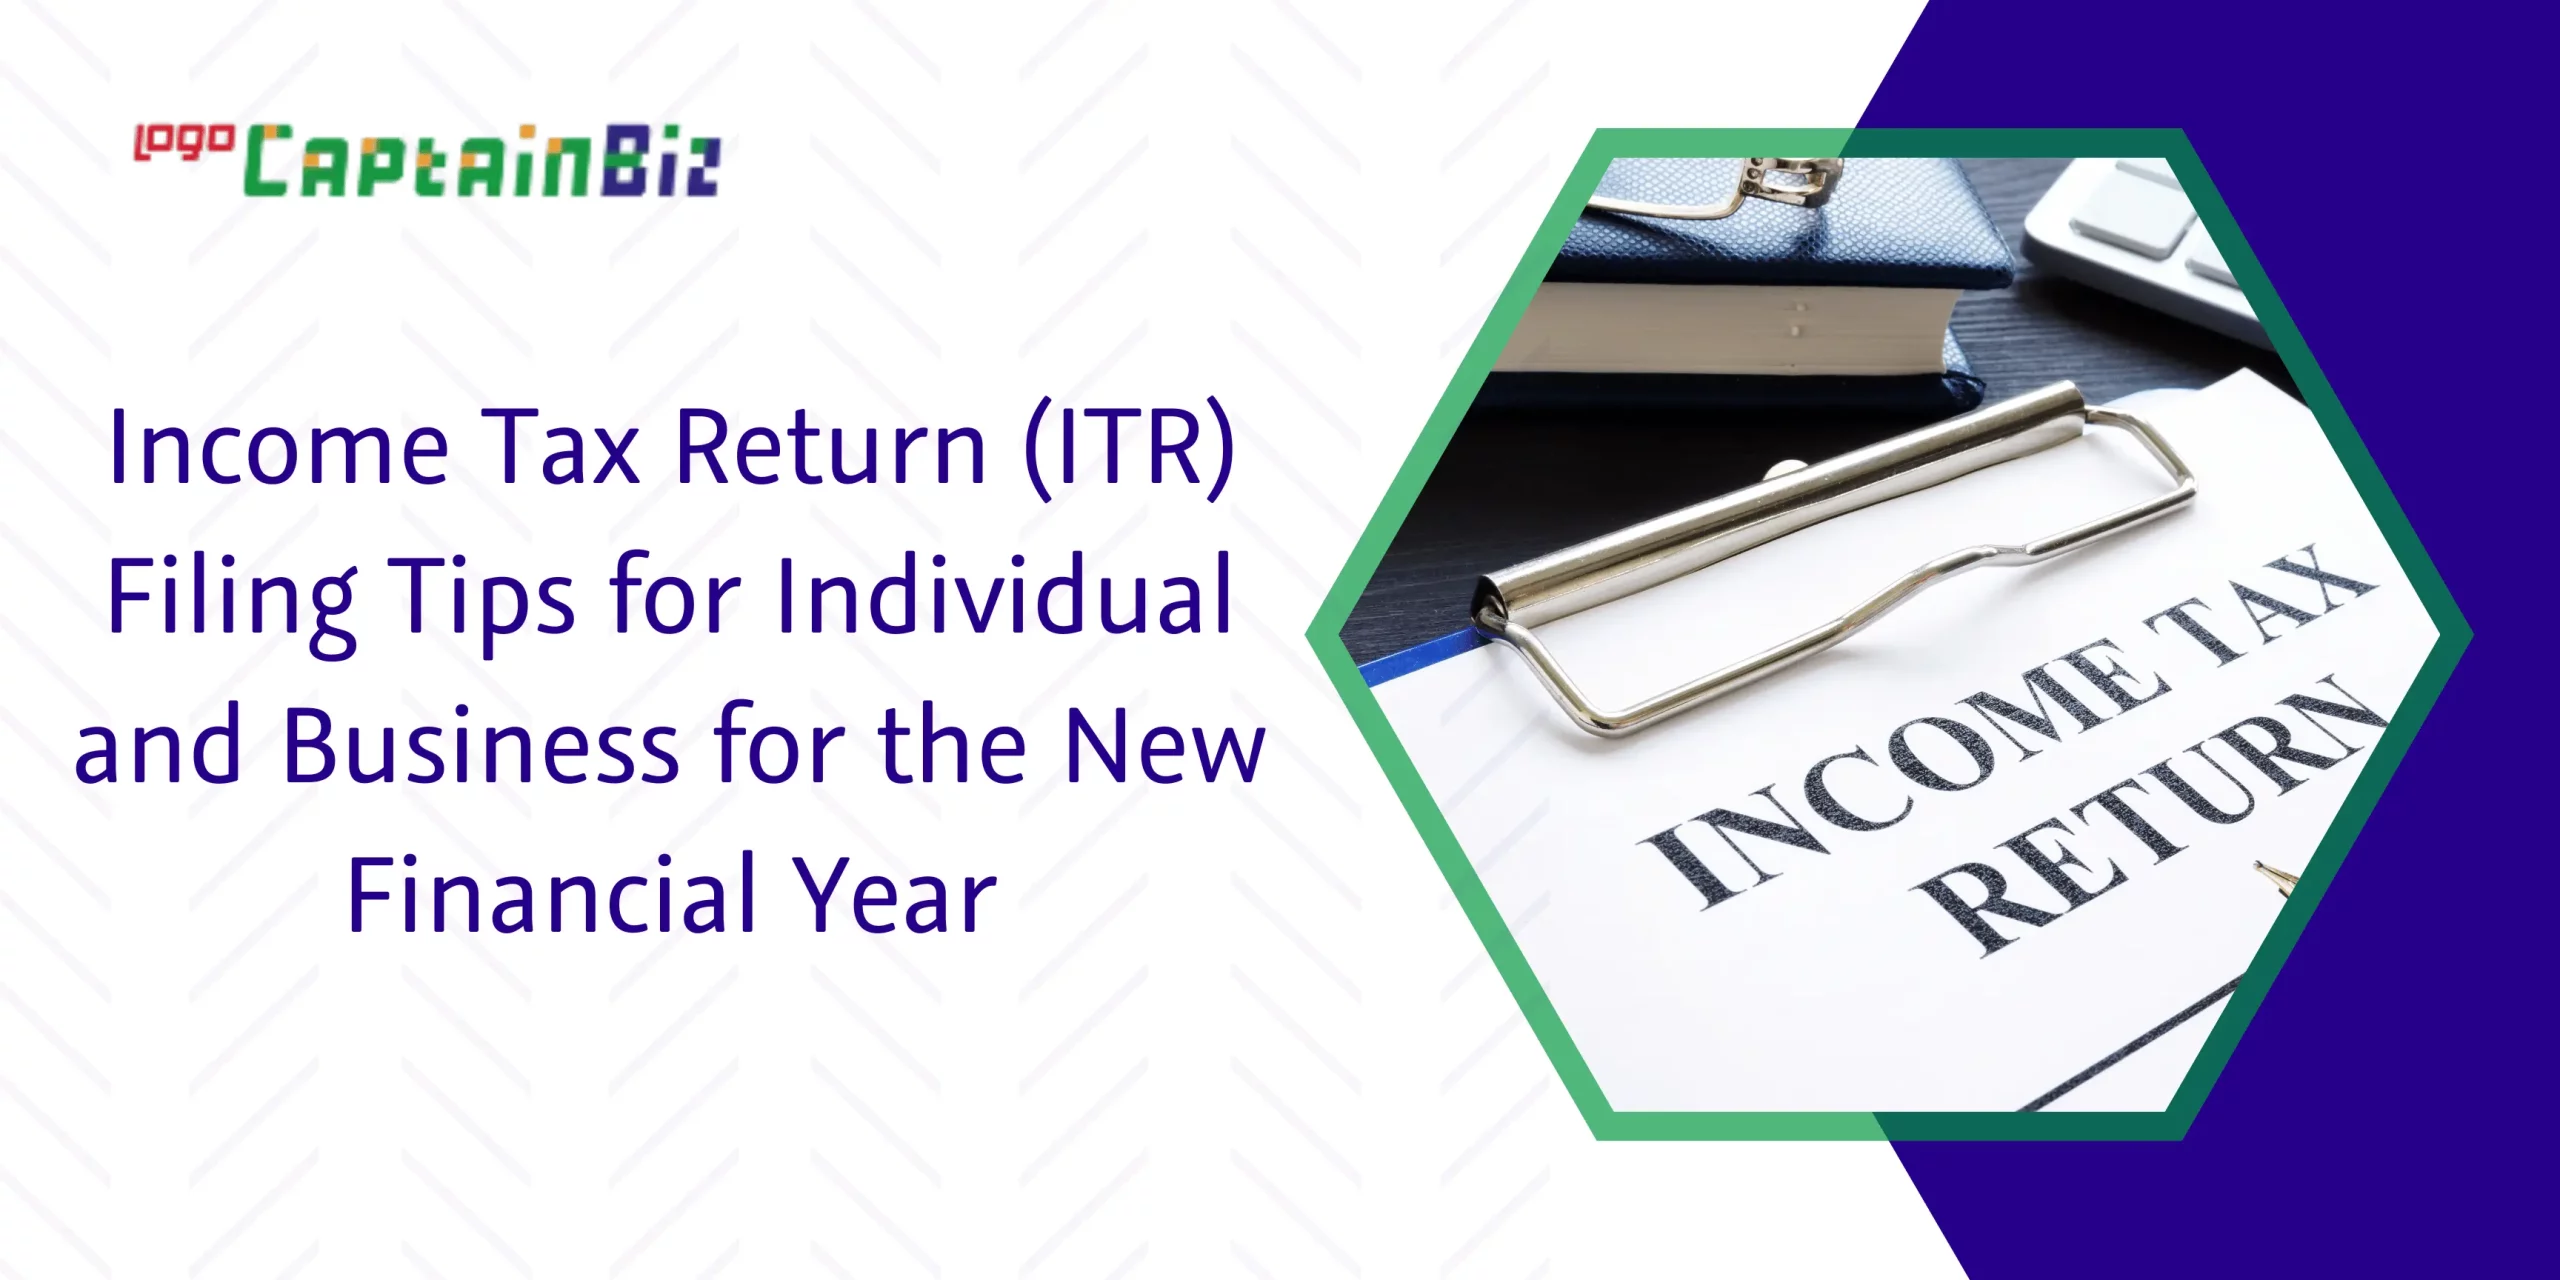 CaptainBiz: income tax return (itr) filing tips for individual and business for the new financial year